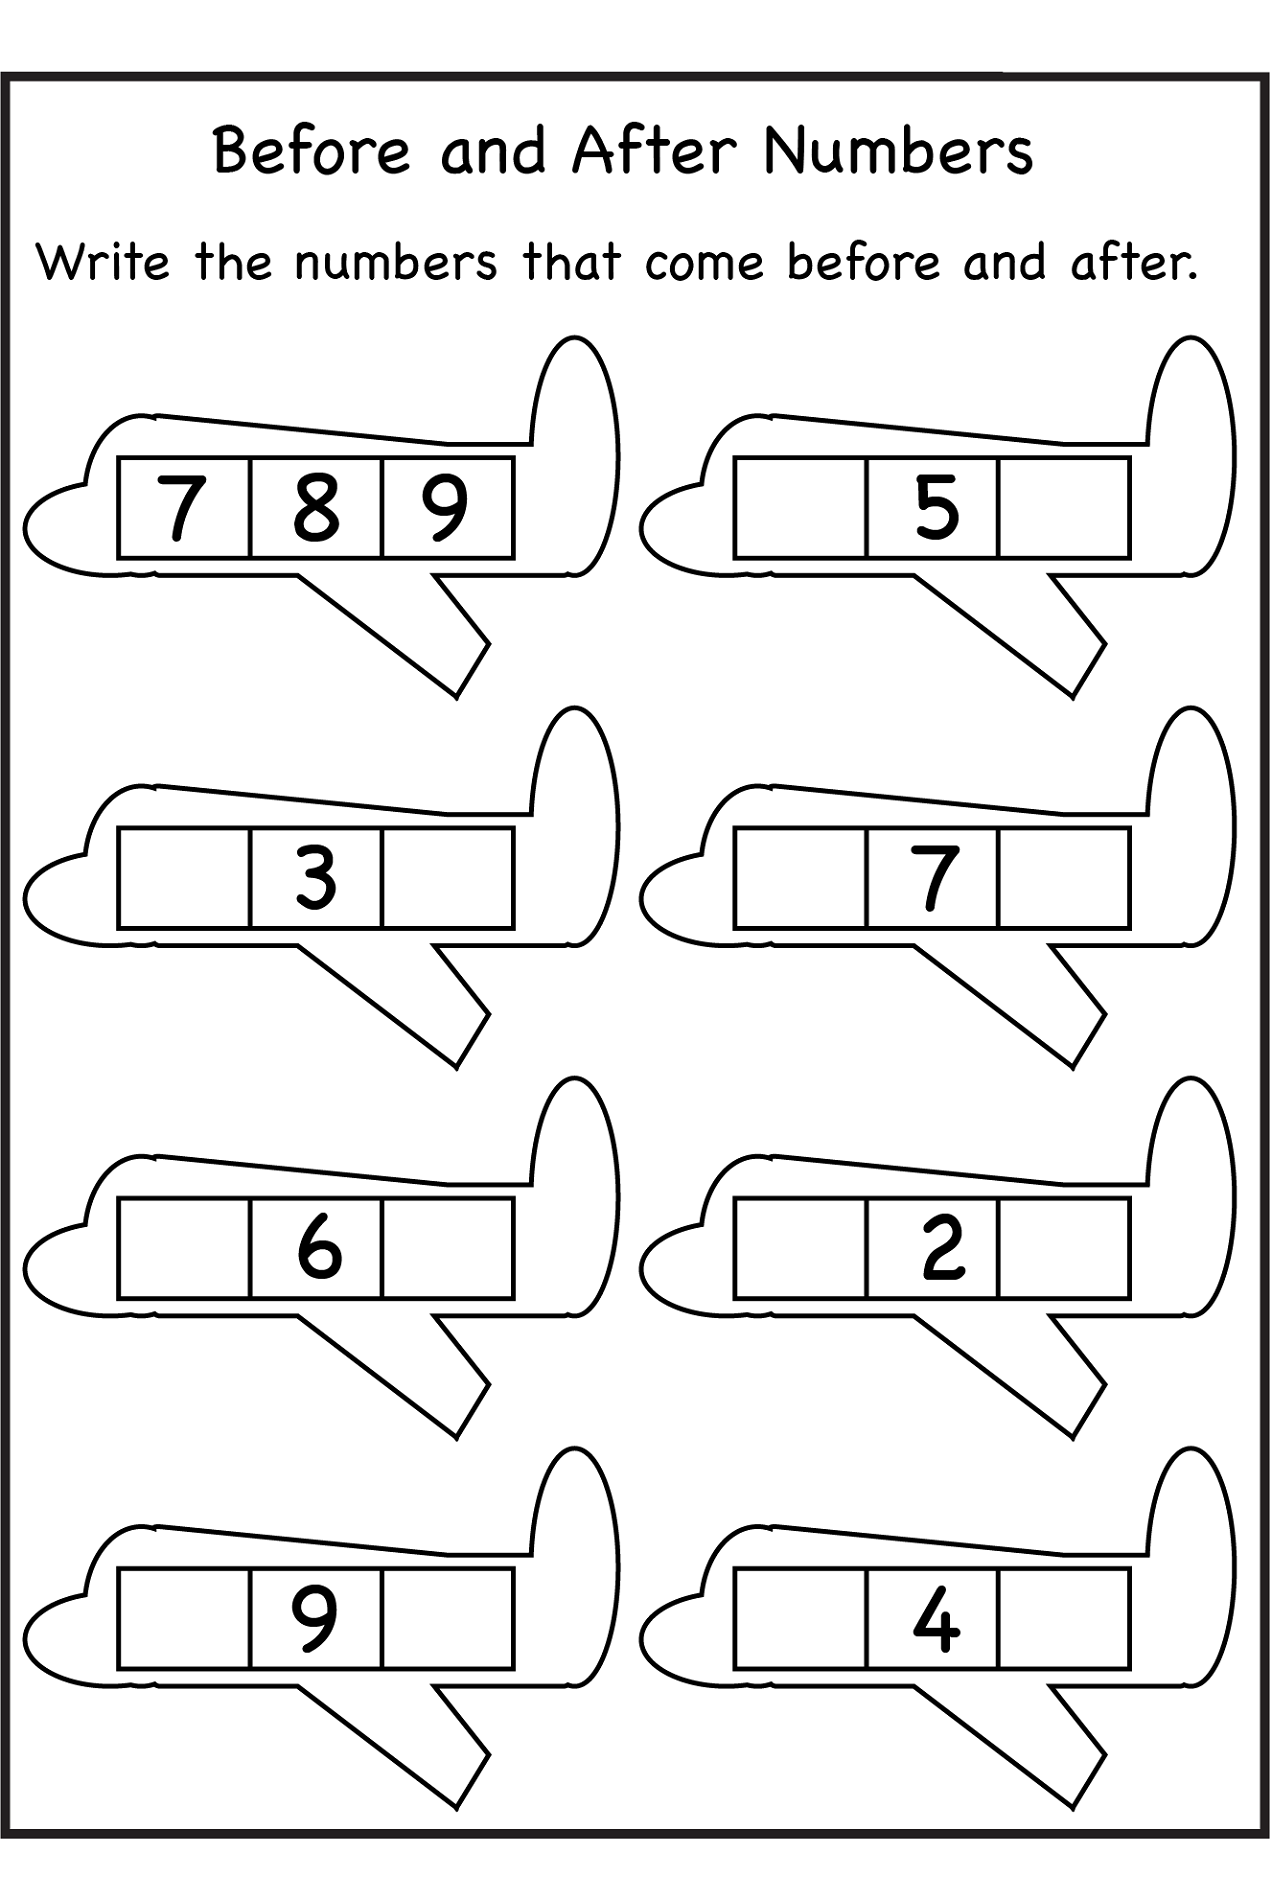 before and after number worksheet for children